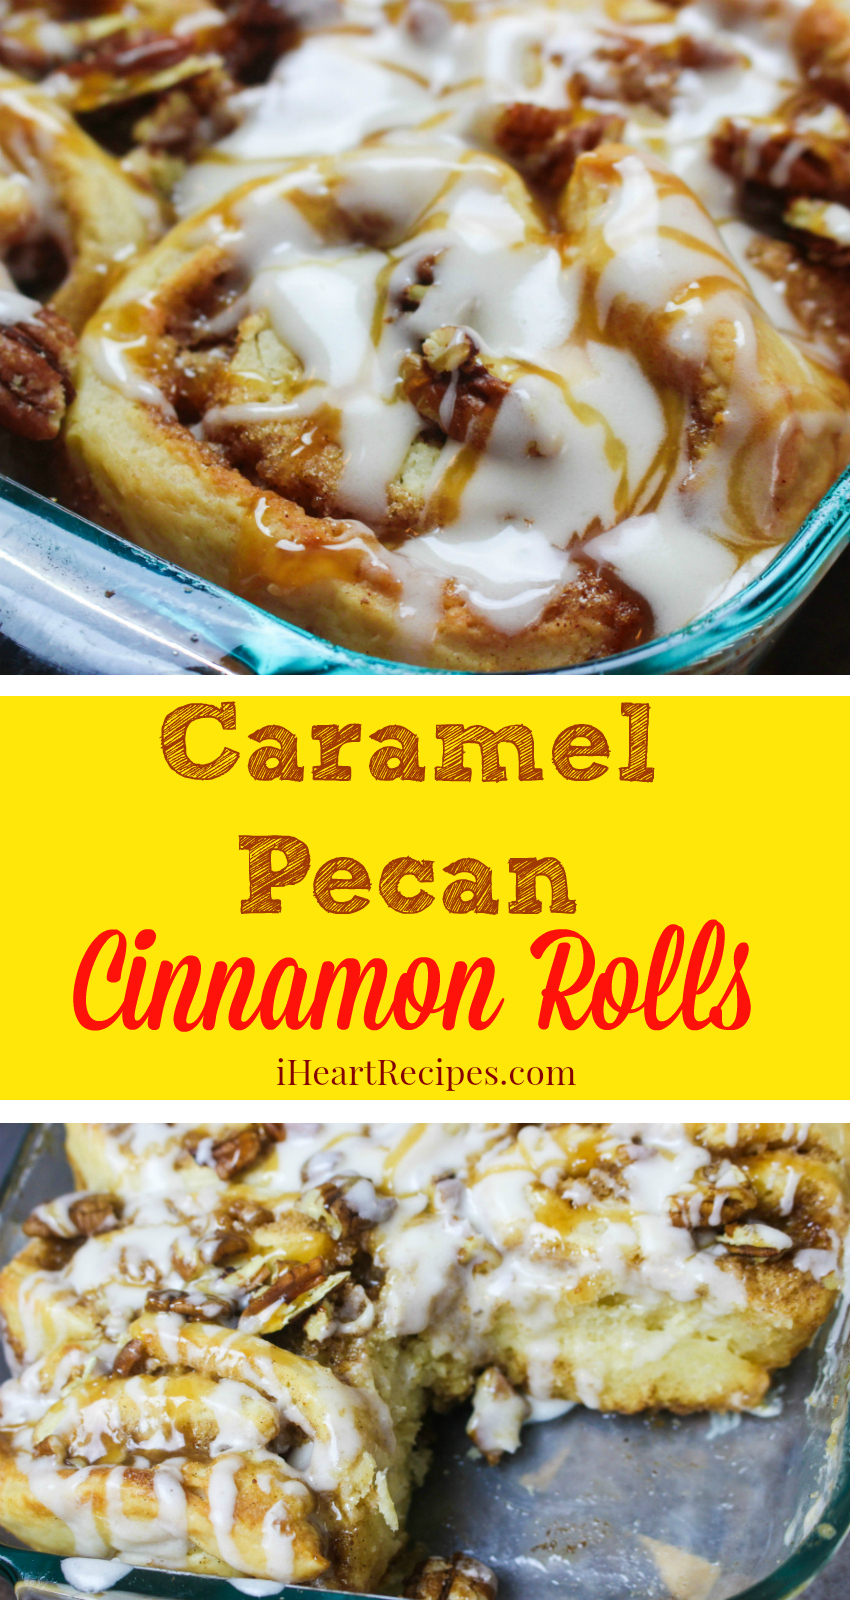 Caramel Pecan Cinnamon Rolls are a perfect treat for weekend brunch!